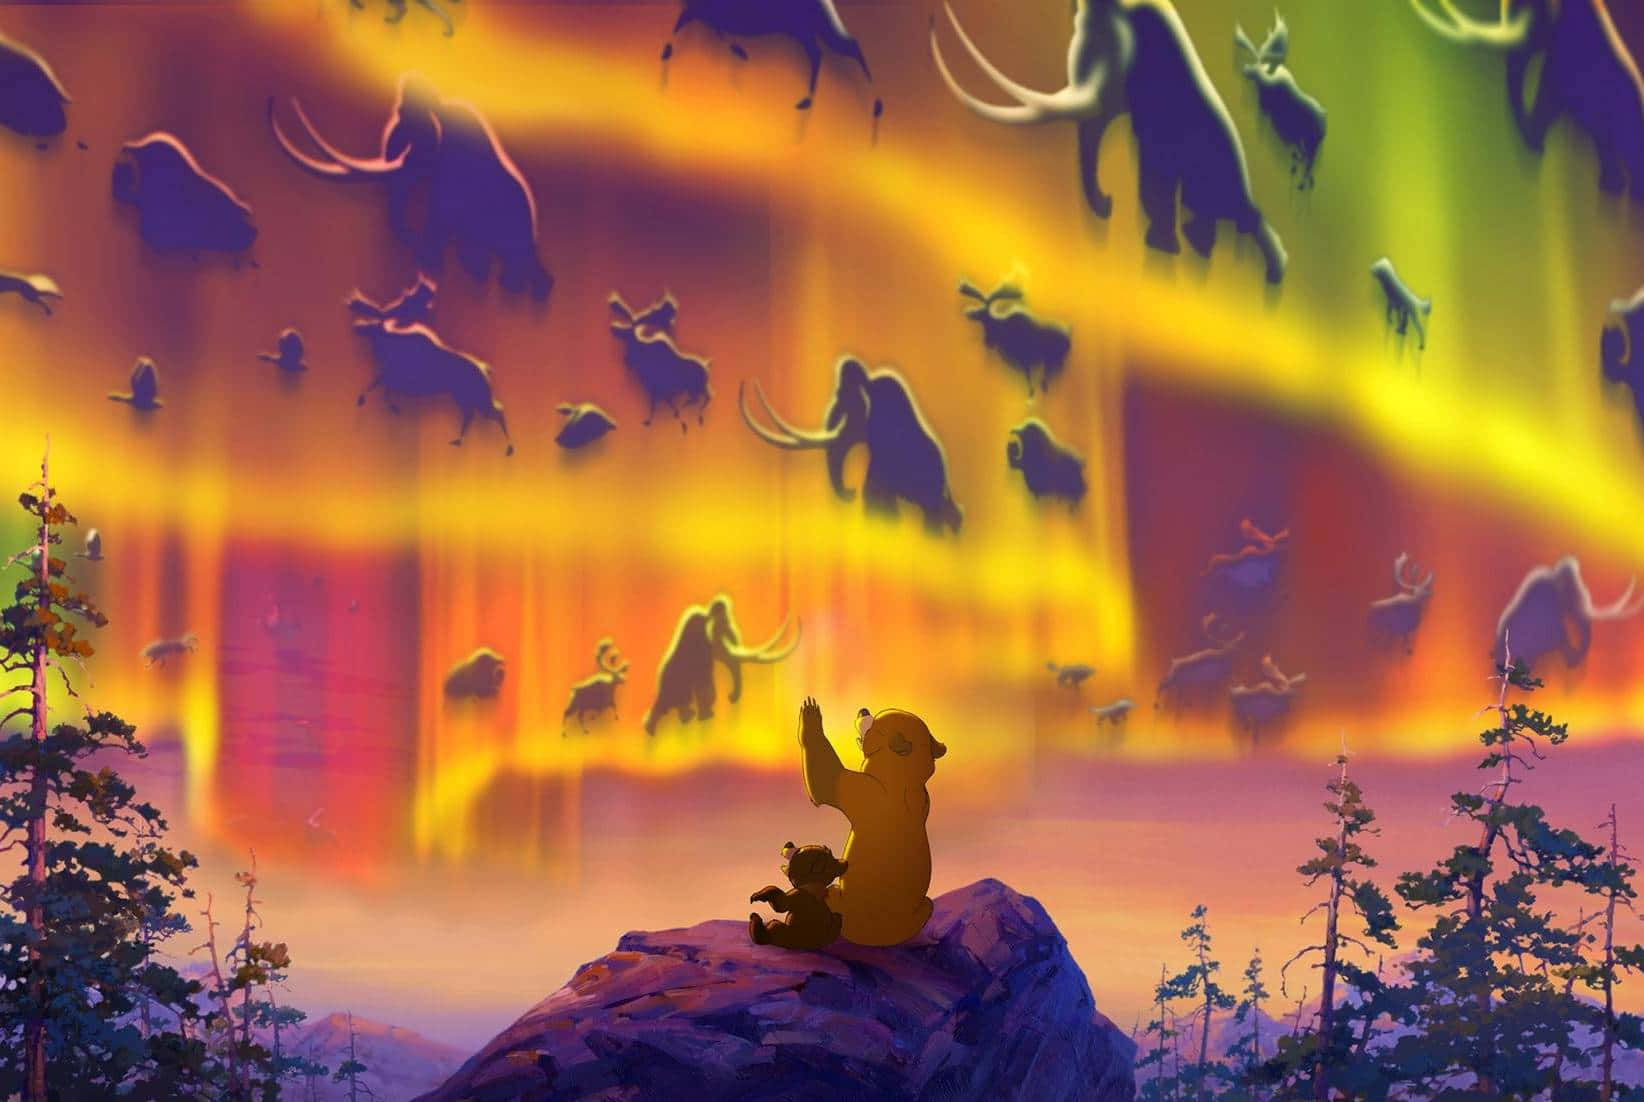 Join siblings Kenai and Koda in their adventure through life and nature in Disney's Brother Bear